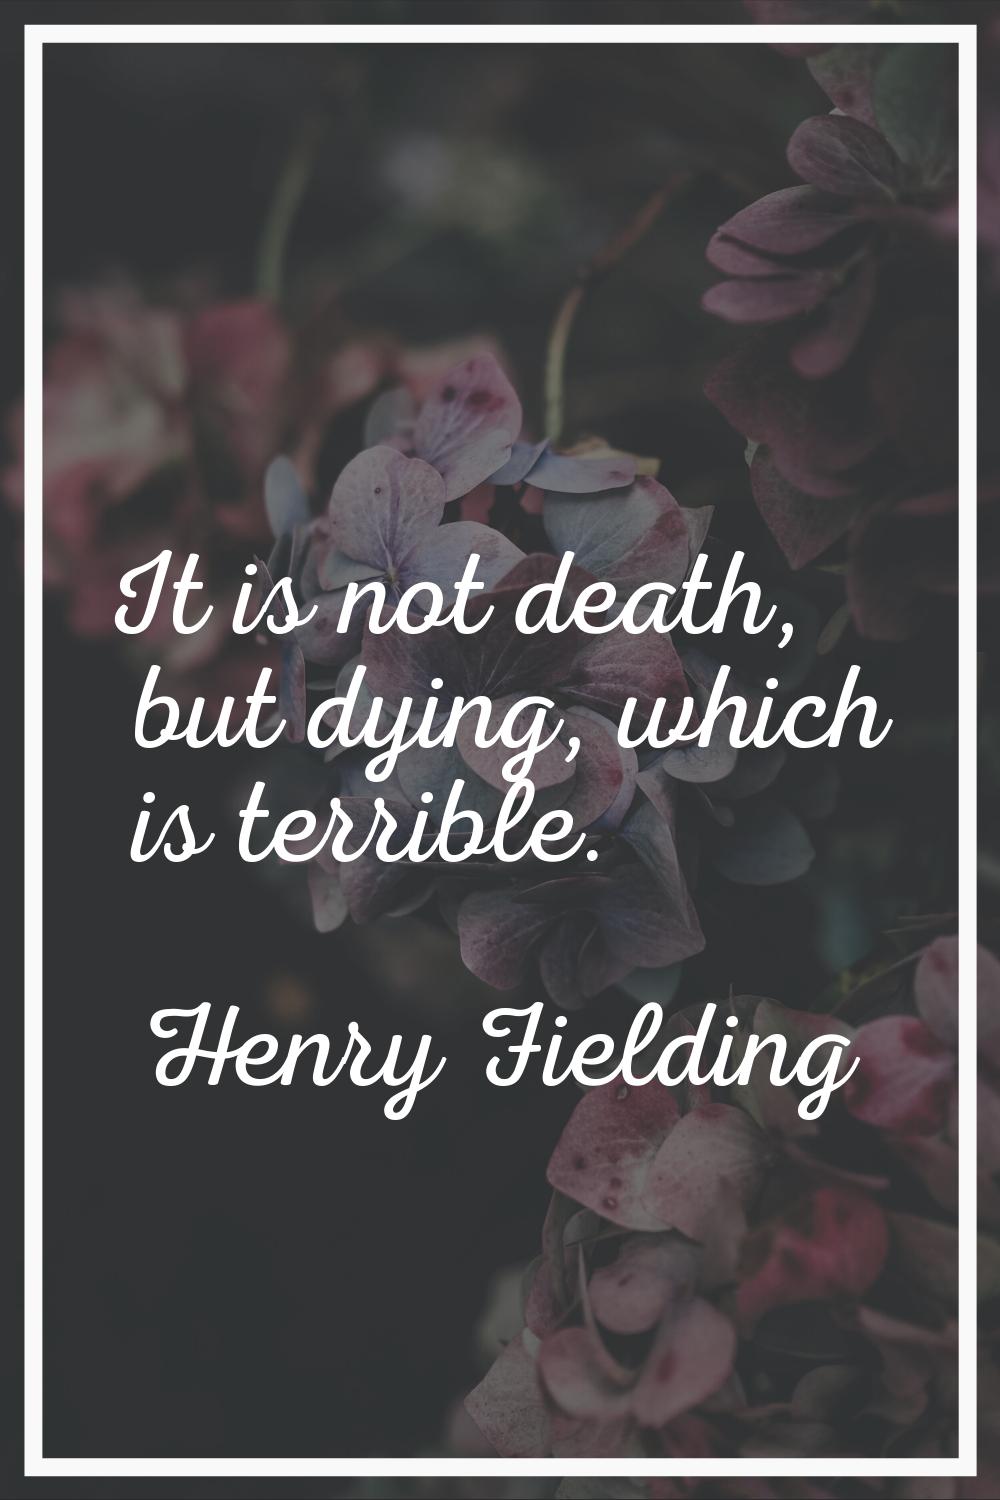 It is not death, but dying, which is terrible.